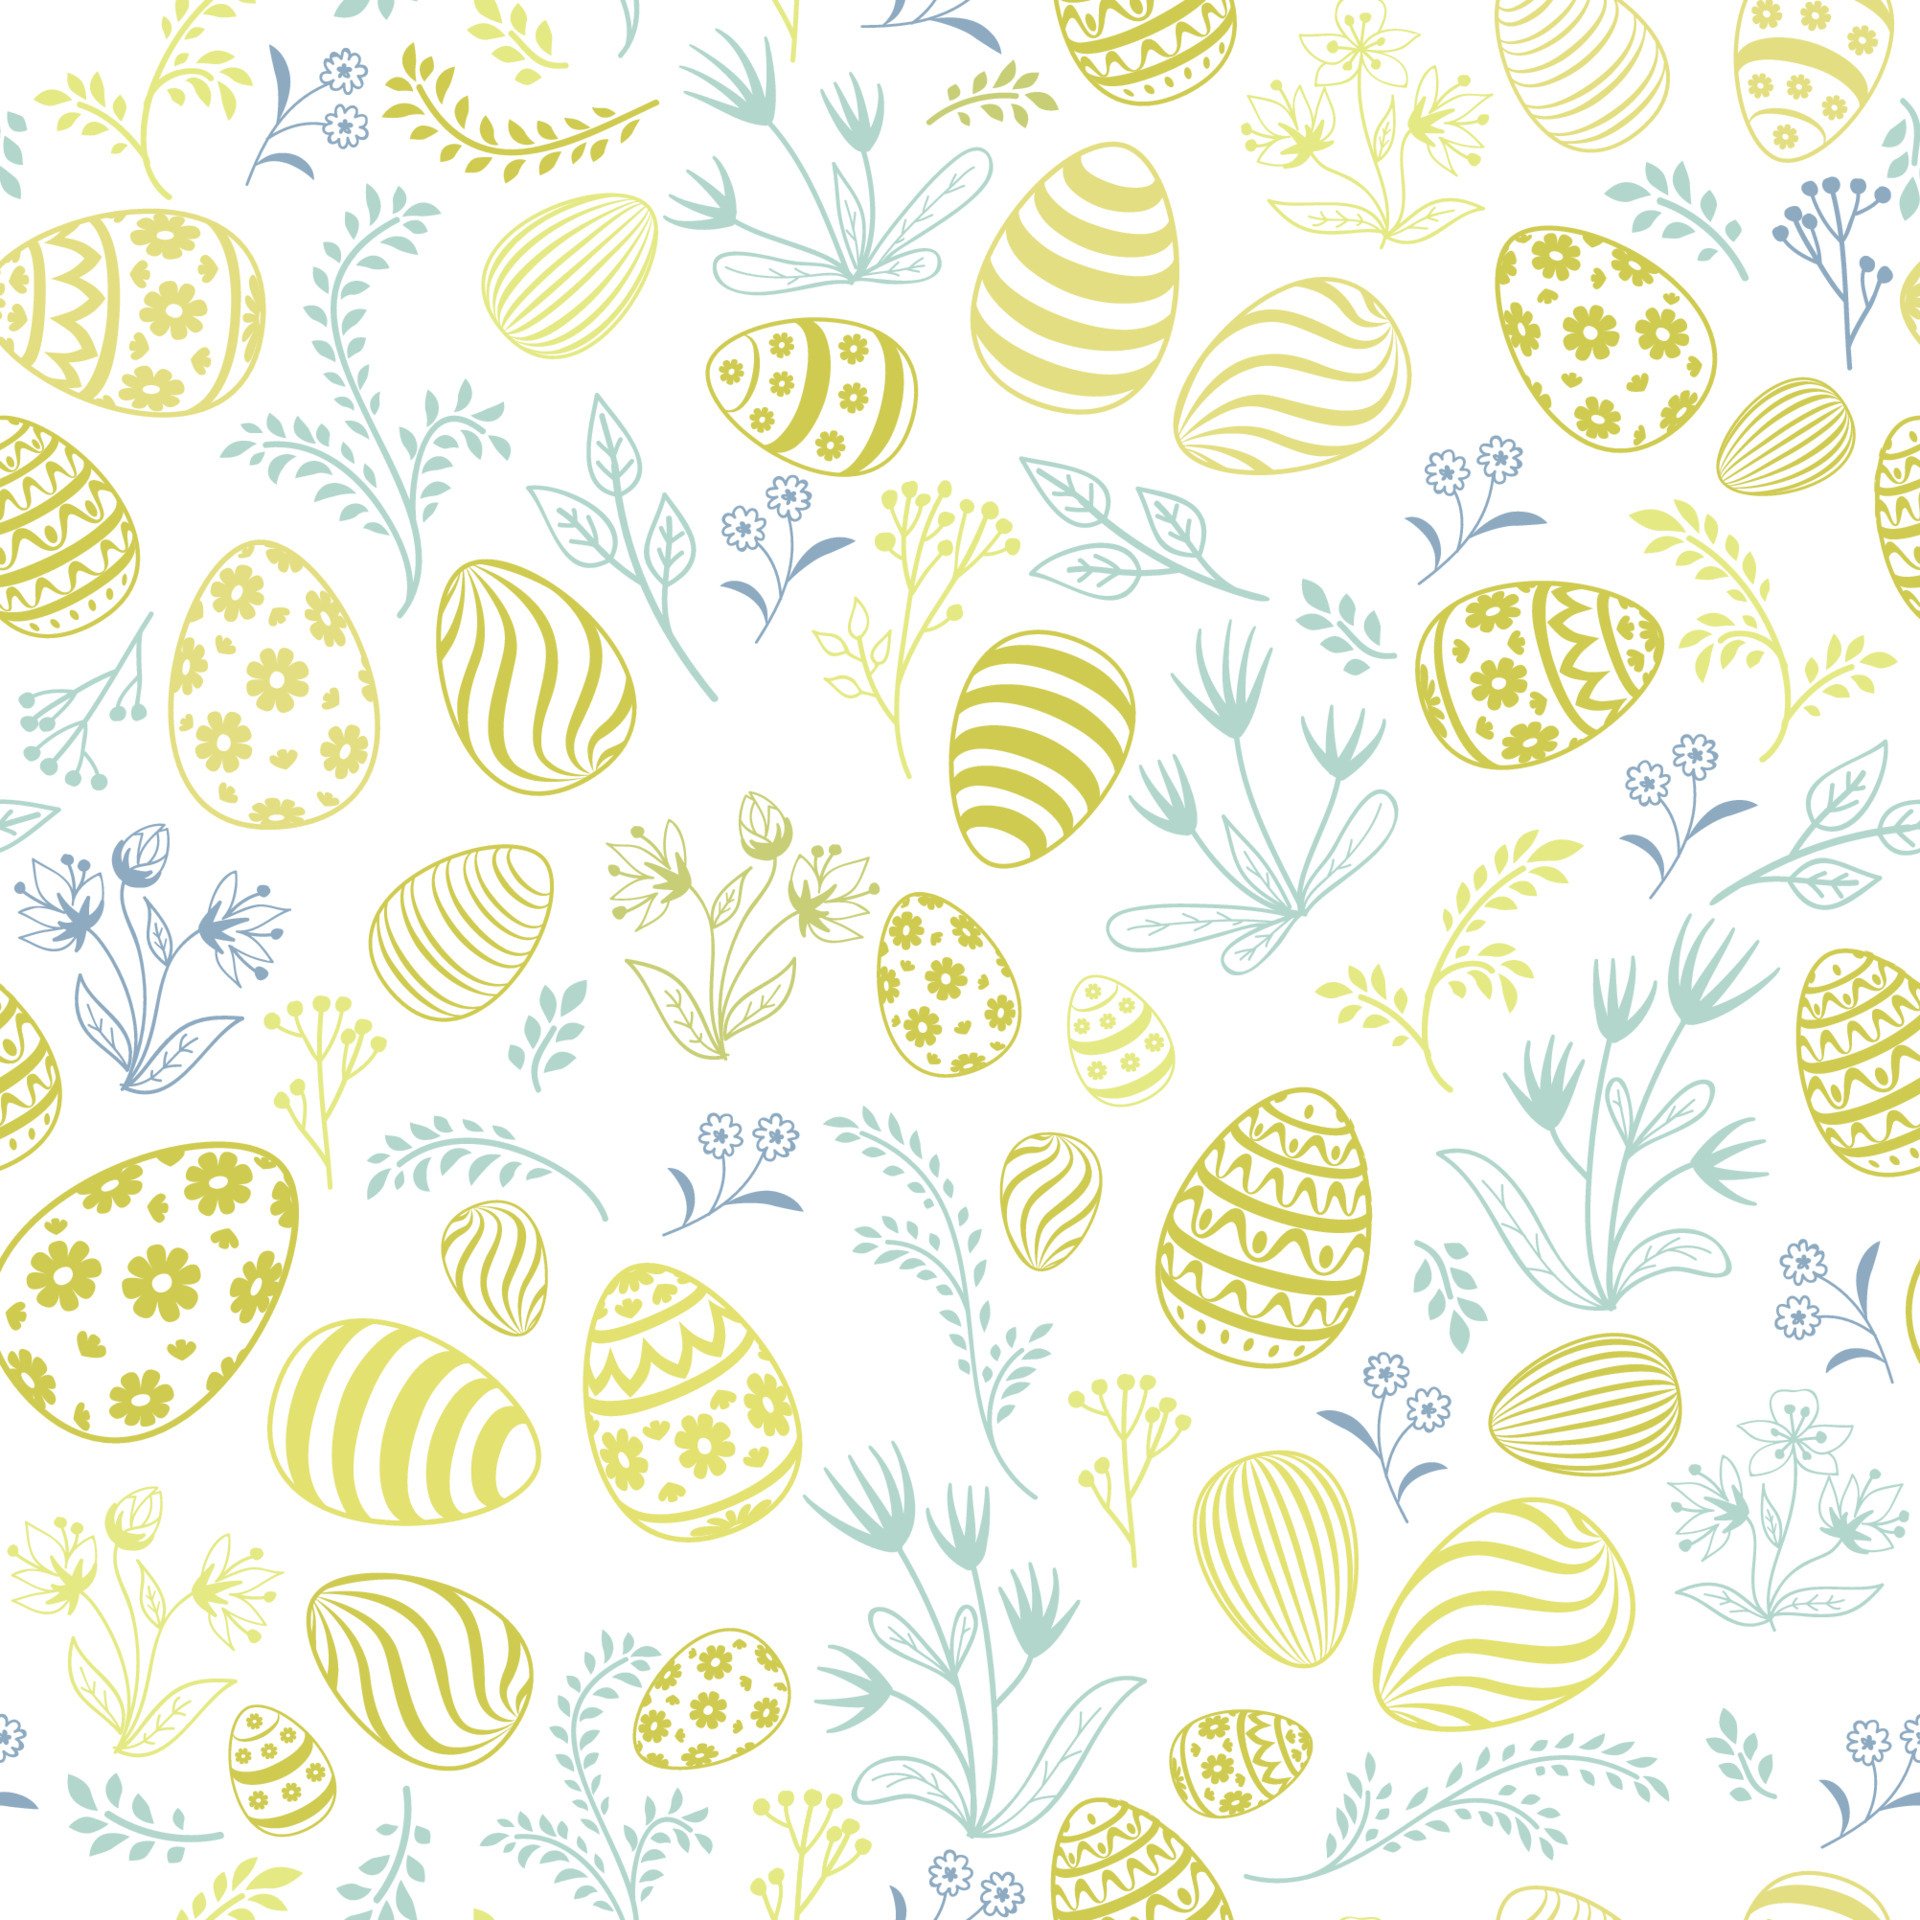 Easter egg floral seamless pattern. Spring holiday background for printing on fabric, paper for scrapbooking, gift wrap and wallpaper